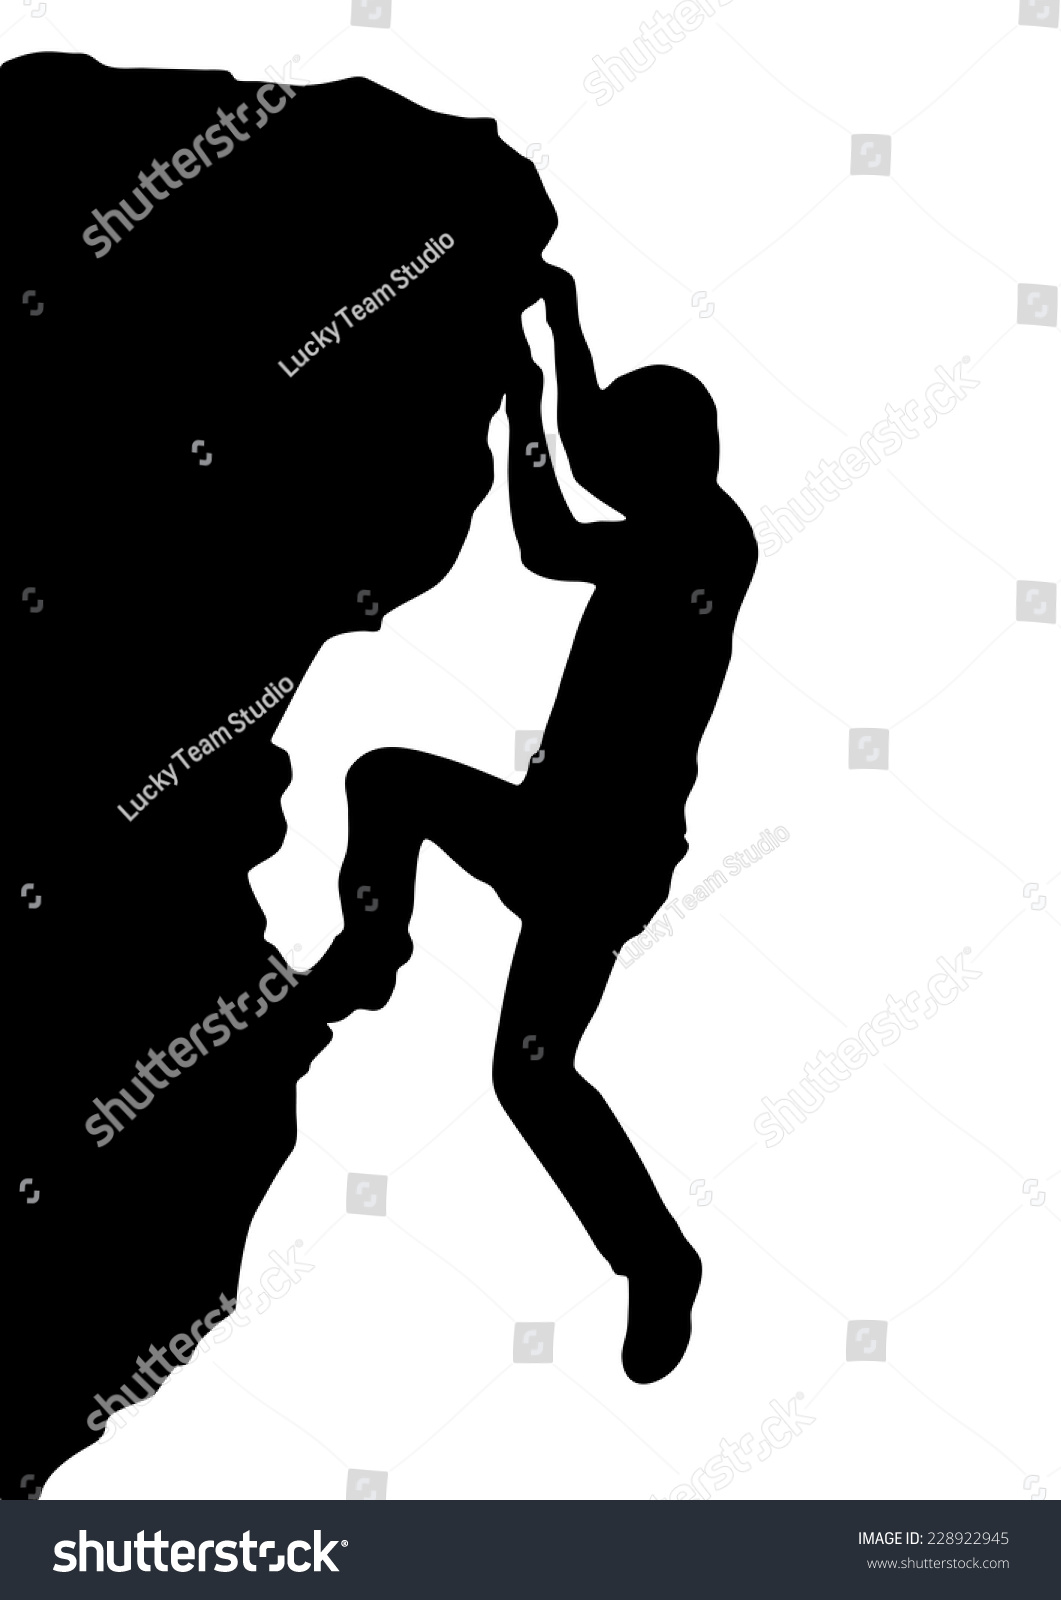 free clipart images rock climbing - photo #25